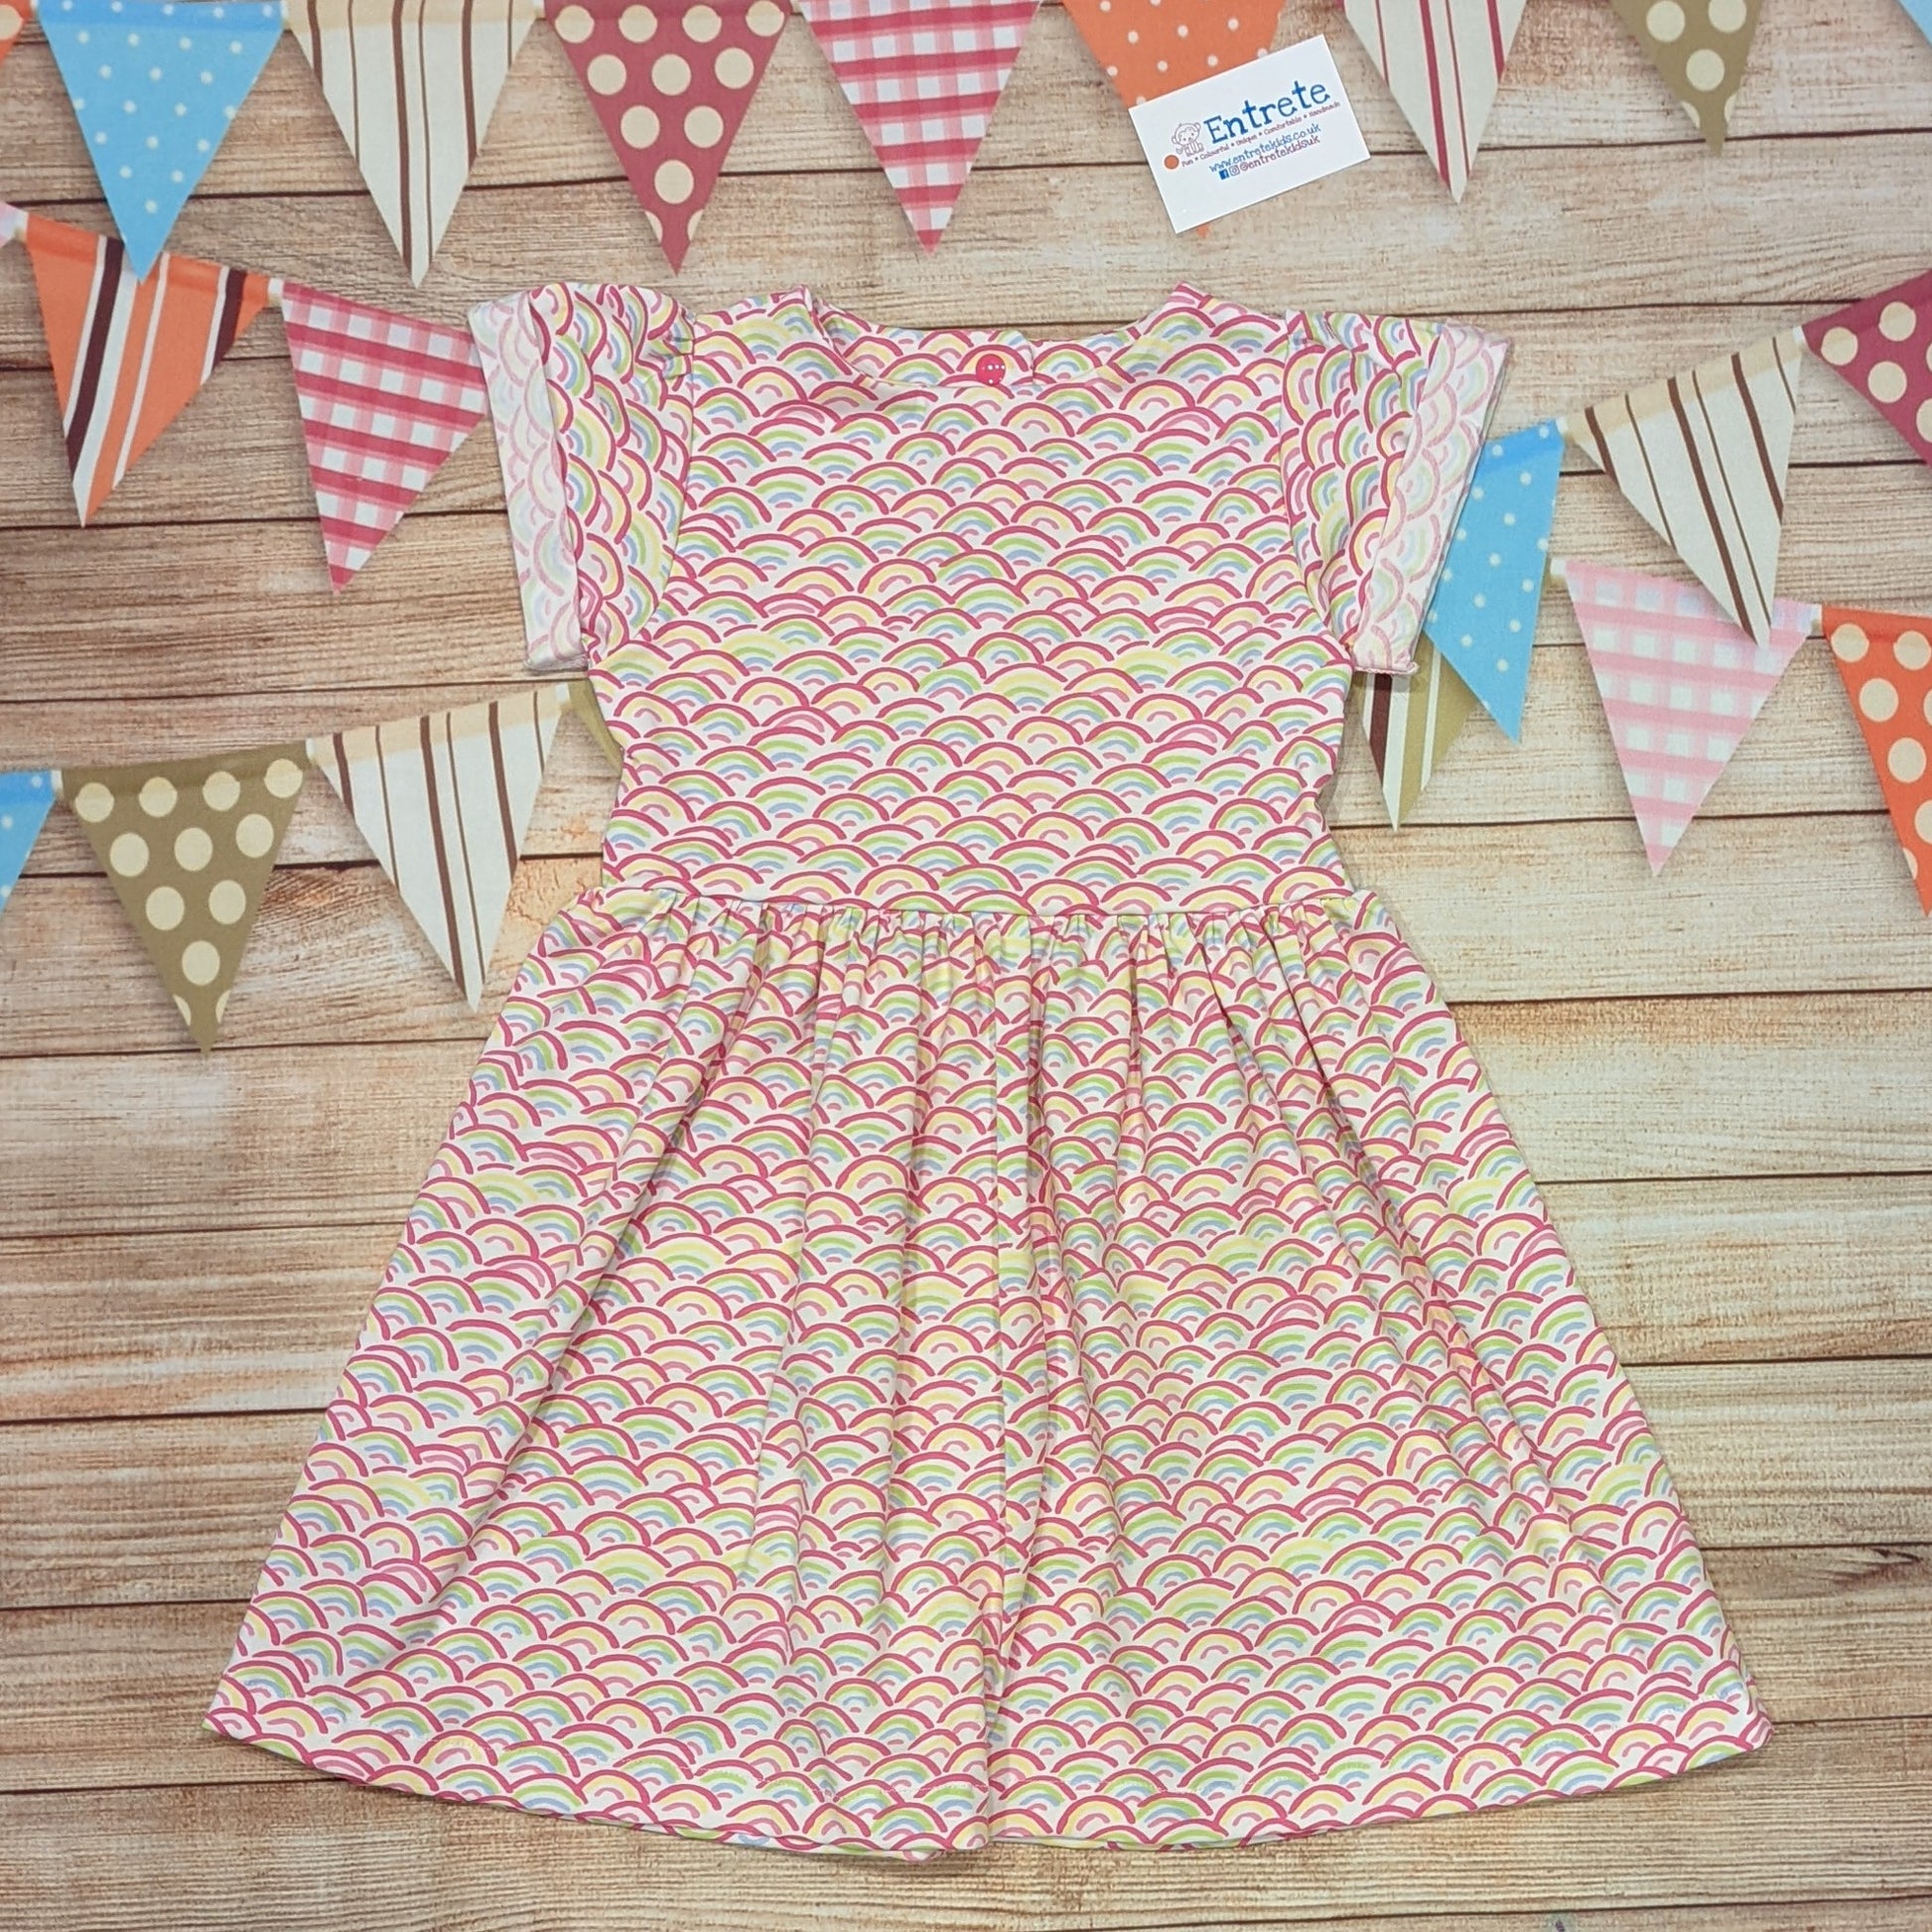 The adorable mini rainbows on white short sleeve dress. Handmade using mini rainbows on white cotton jersey.